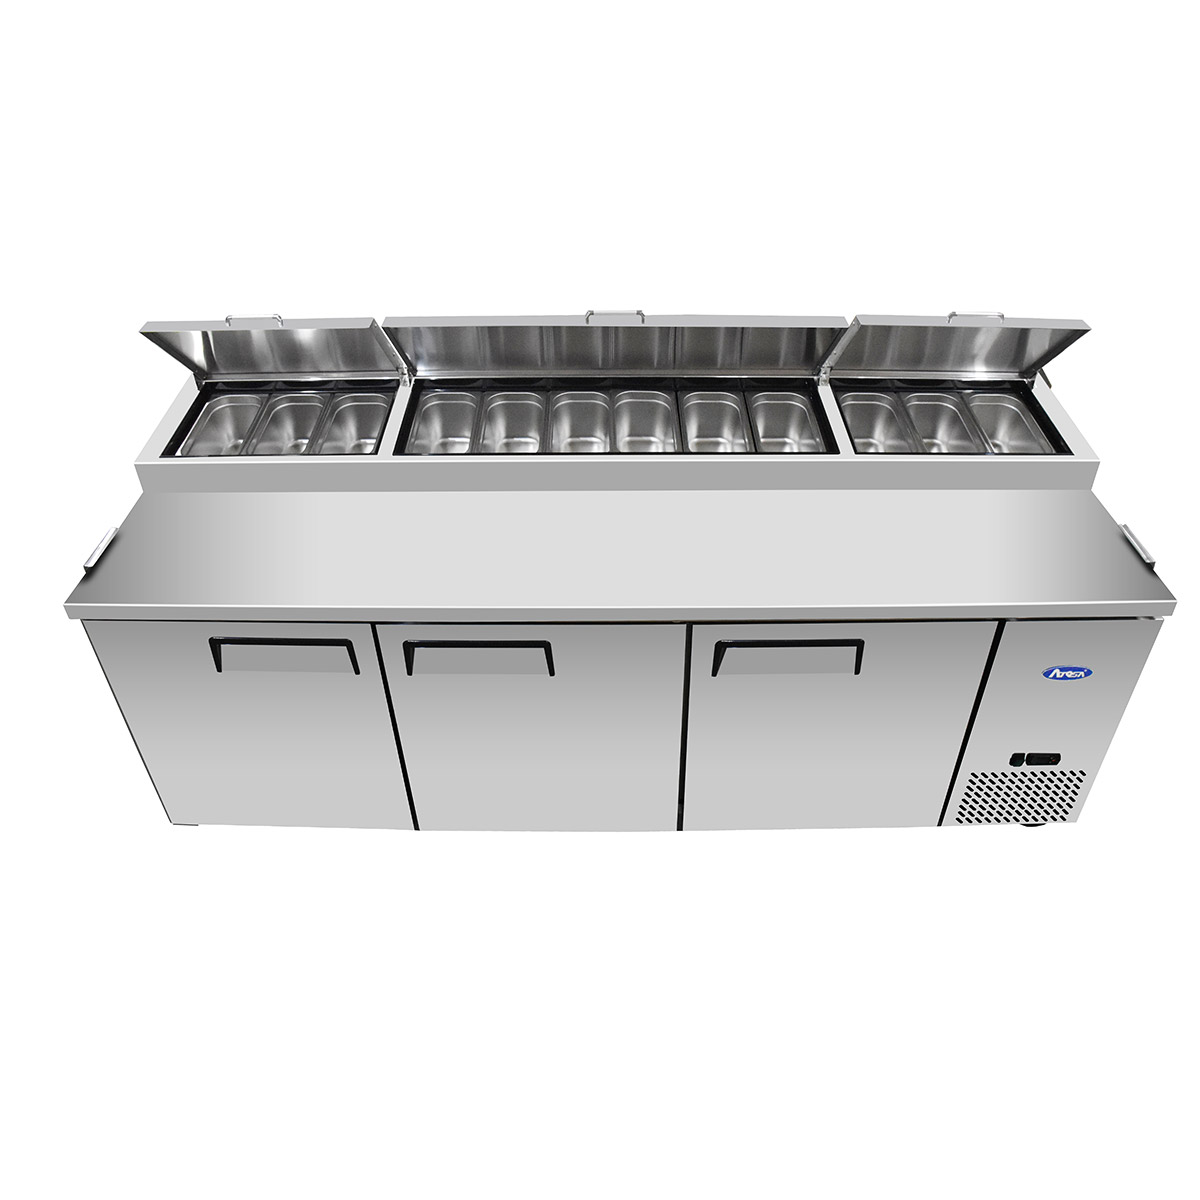 Atosa MPF8203GR 3 Door Refrigeration Preparation Table Including 12x 1/3 GN Pan Option